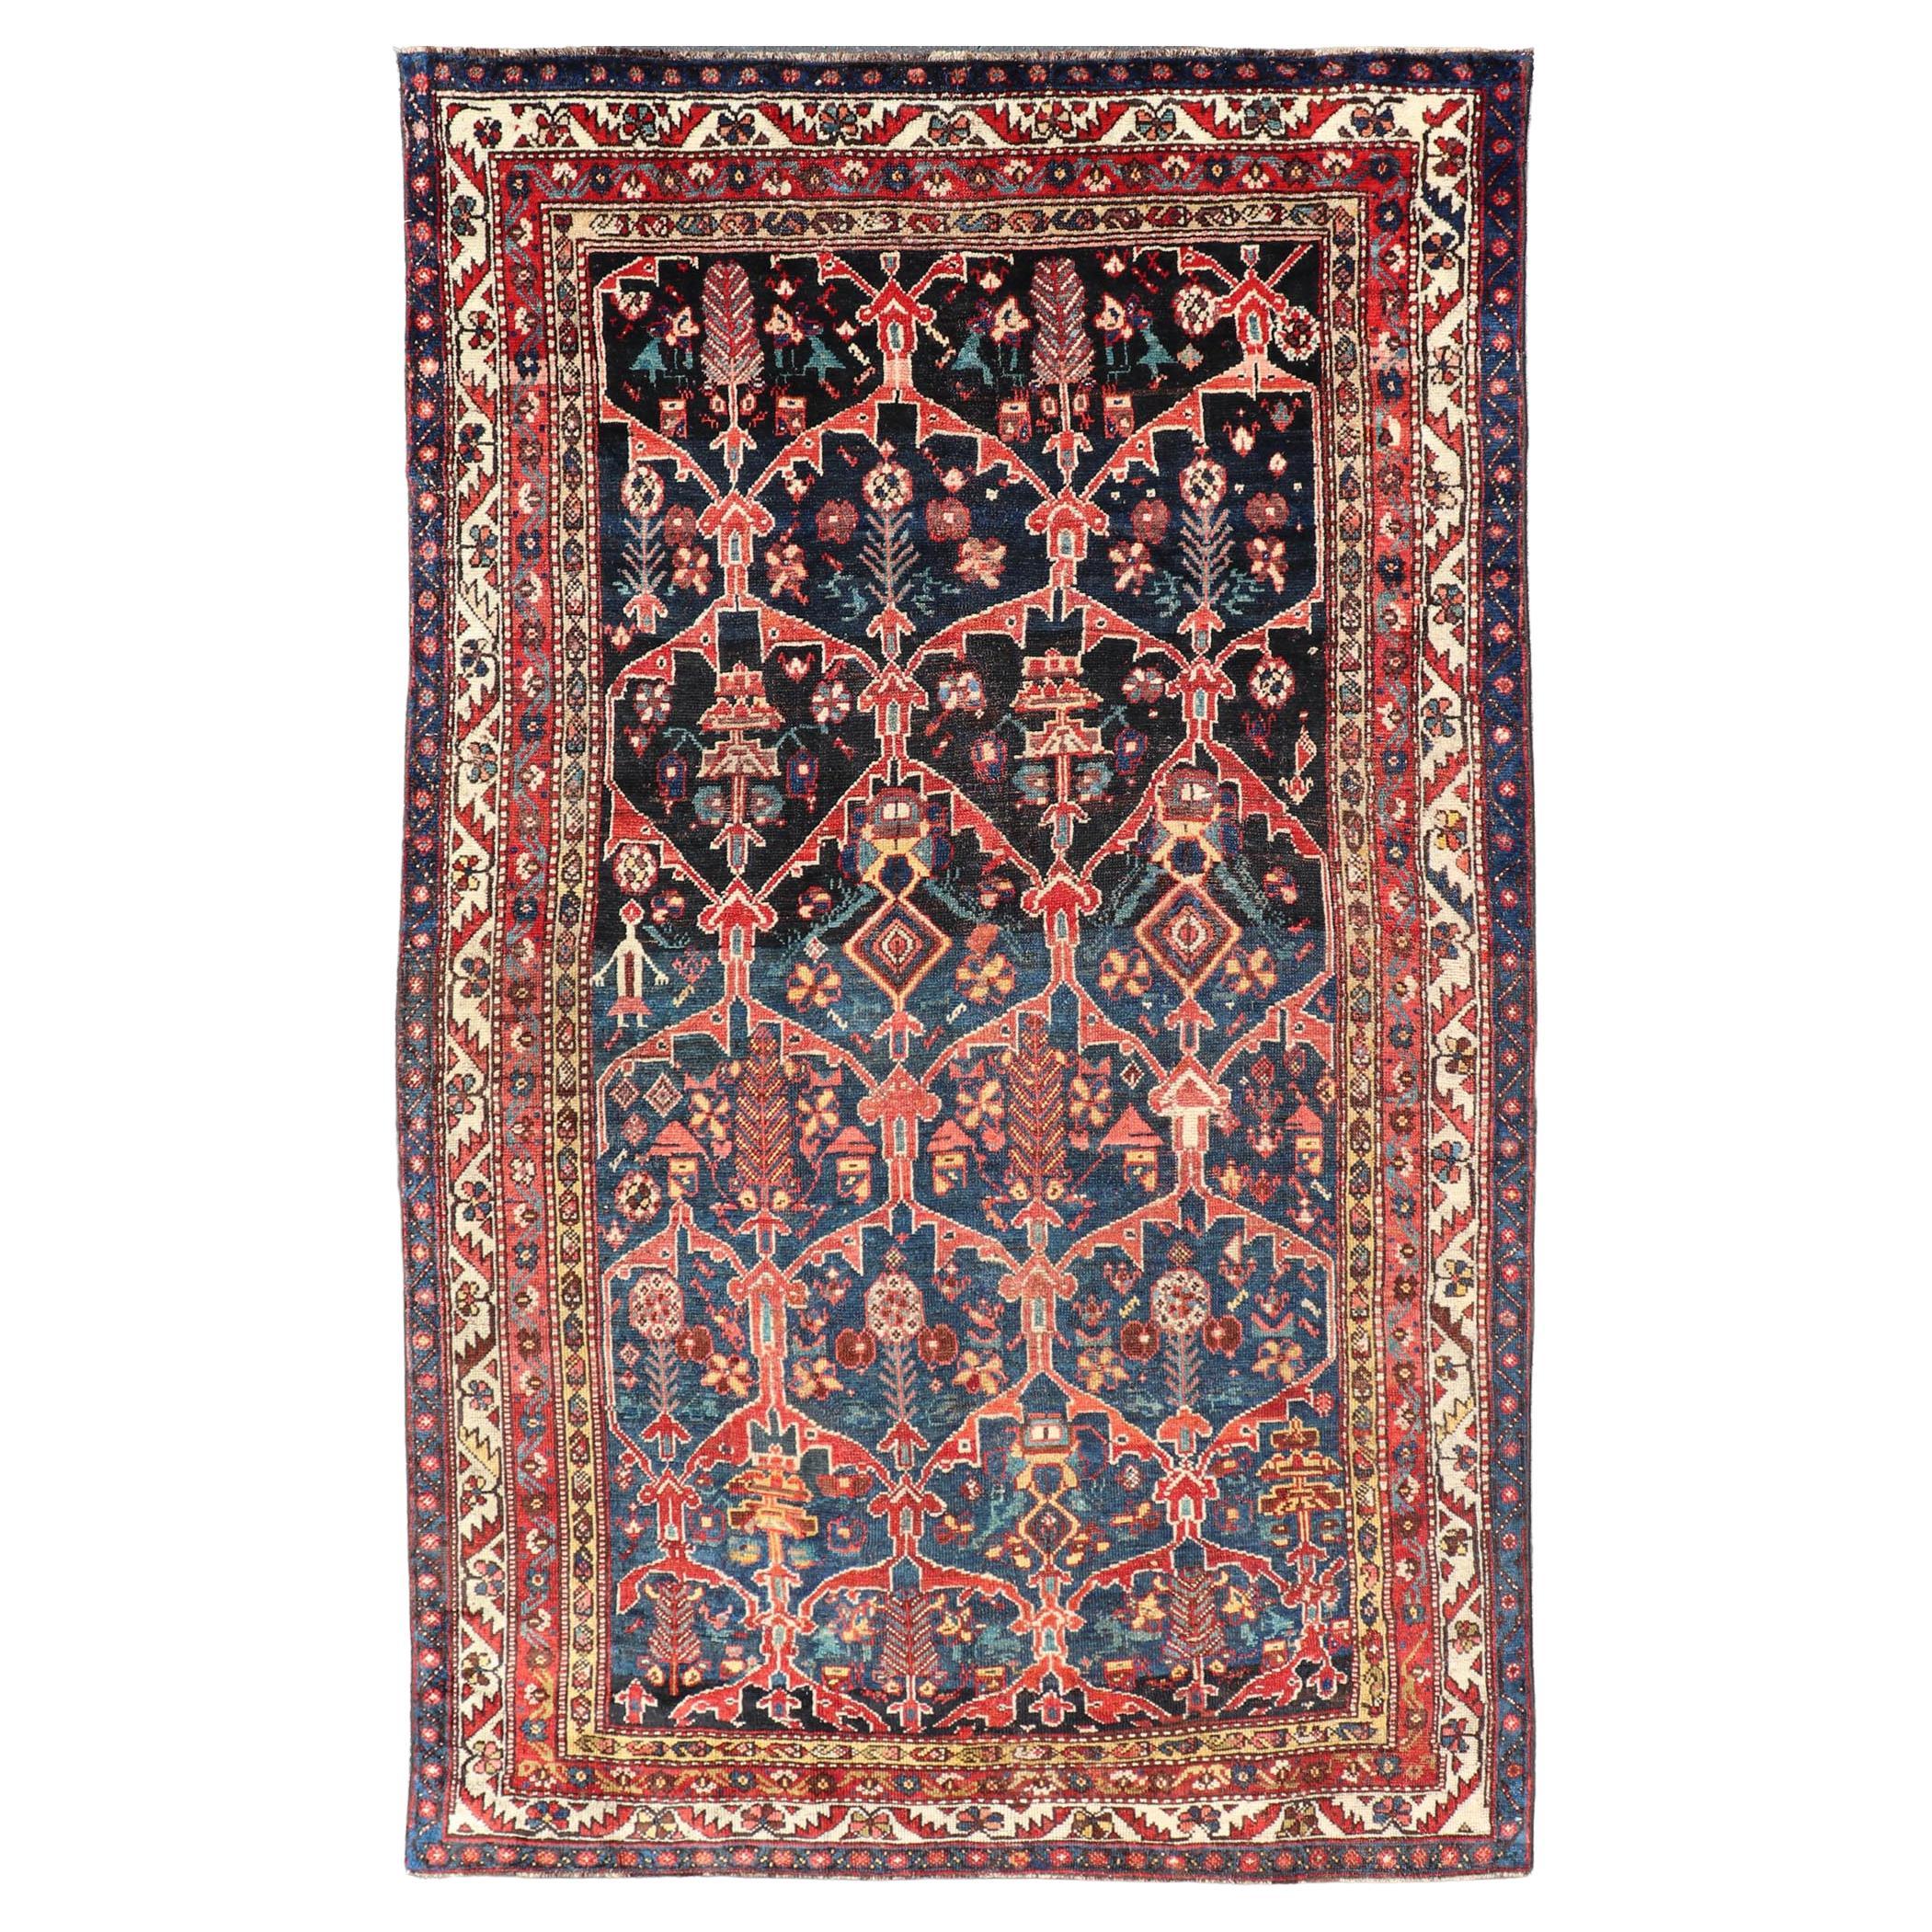 Antique Persian Bakhitari Colorful Rug with All-Over Floral Medallion Design  For Sale